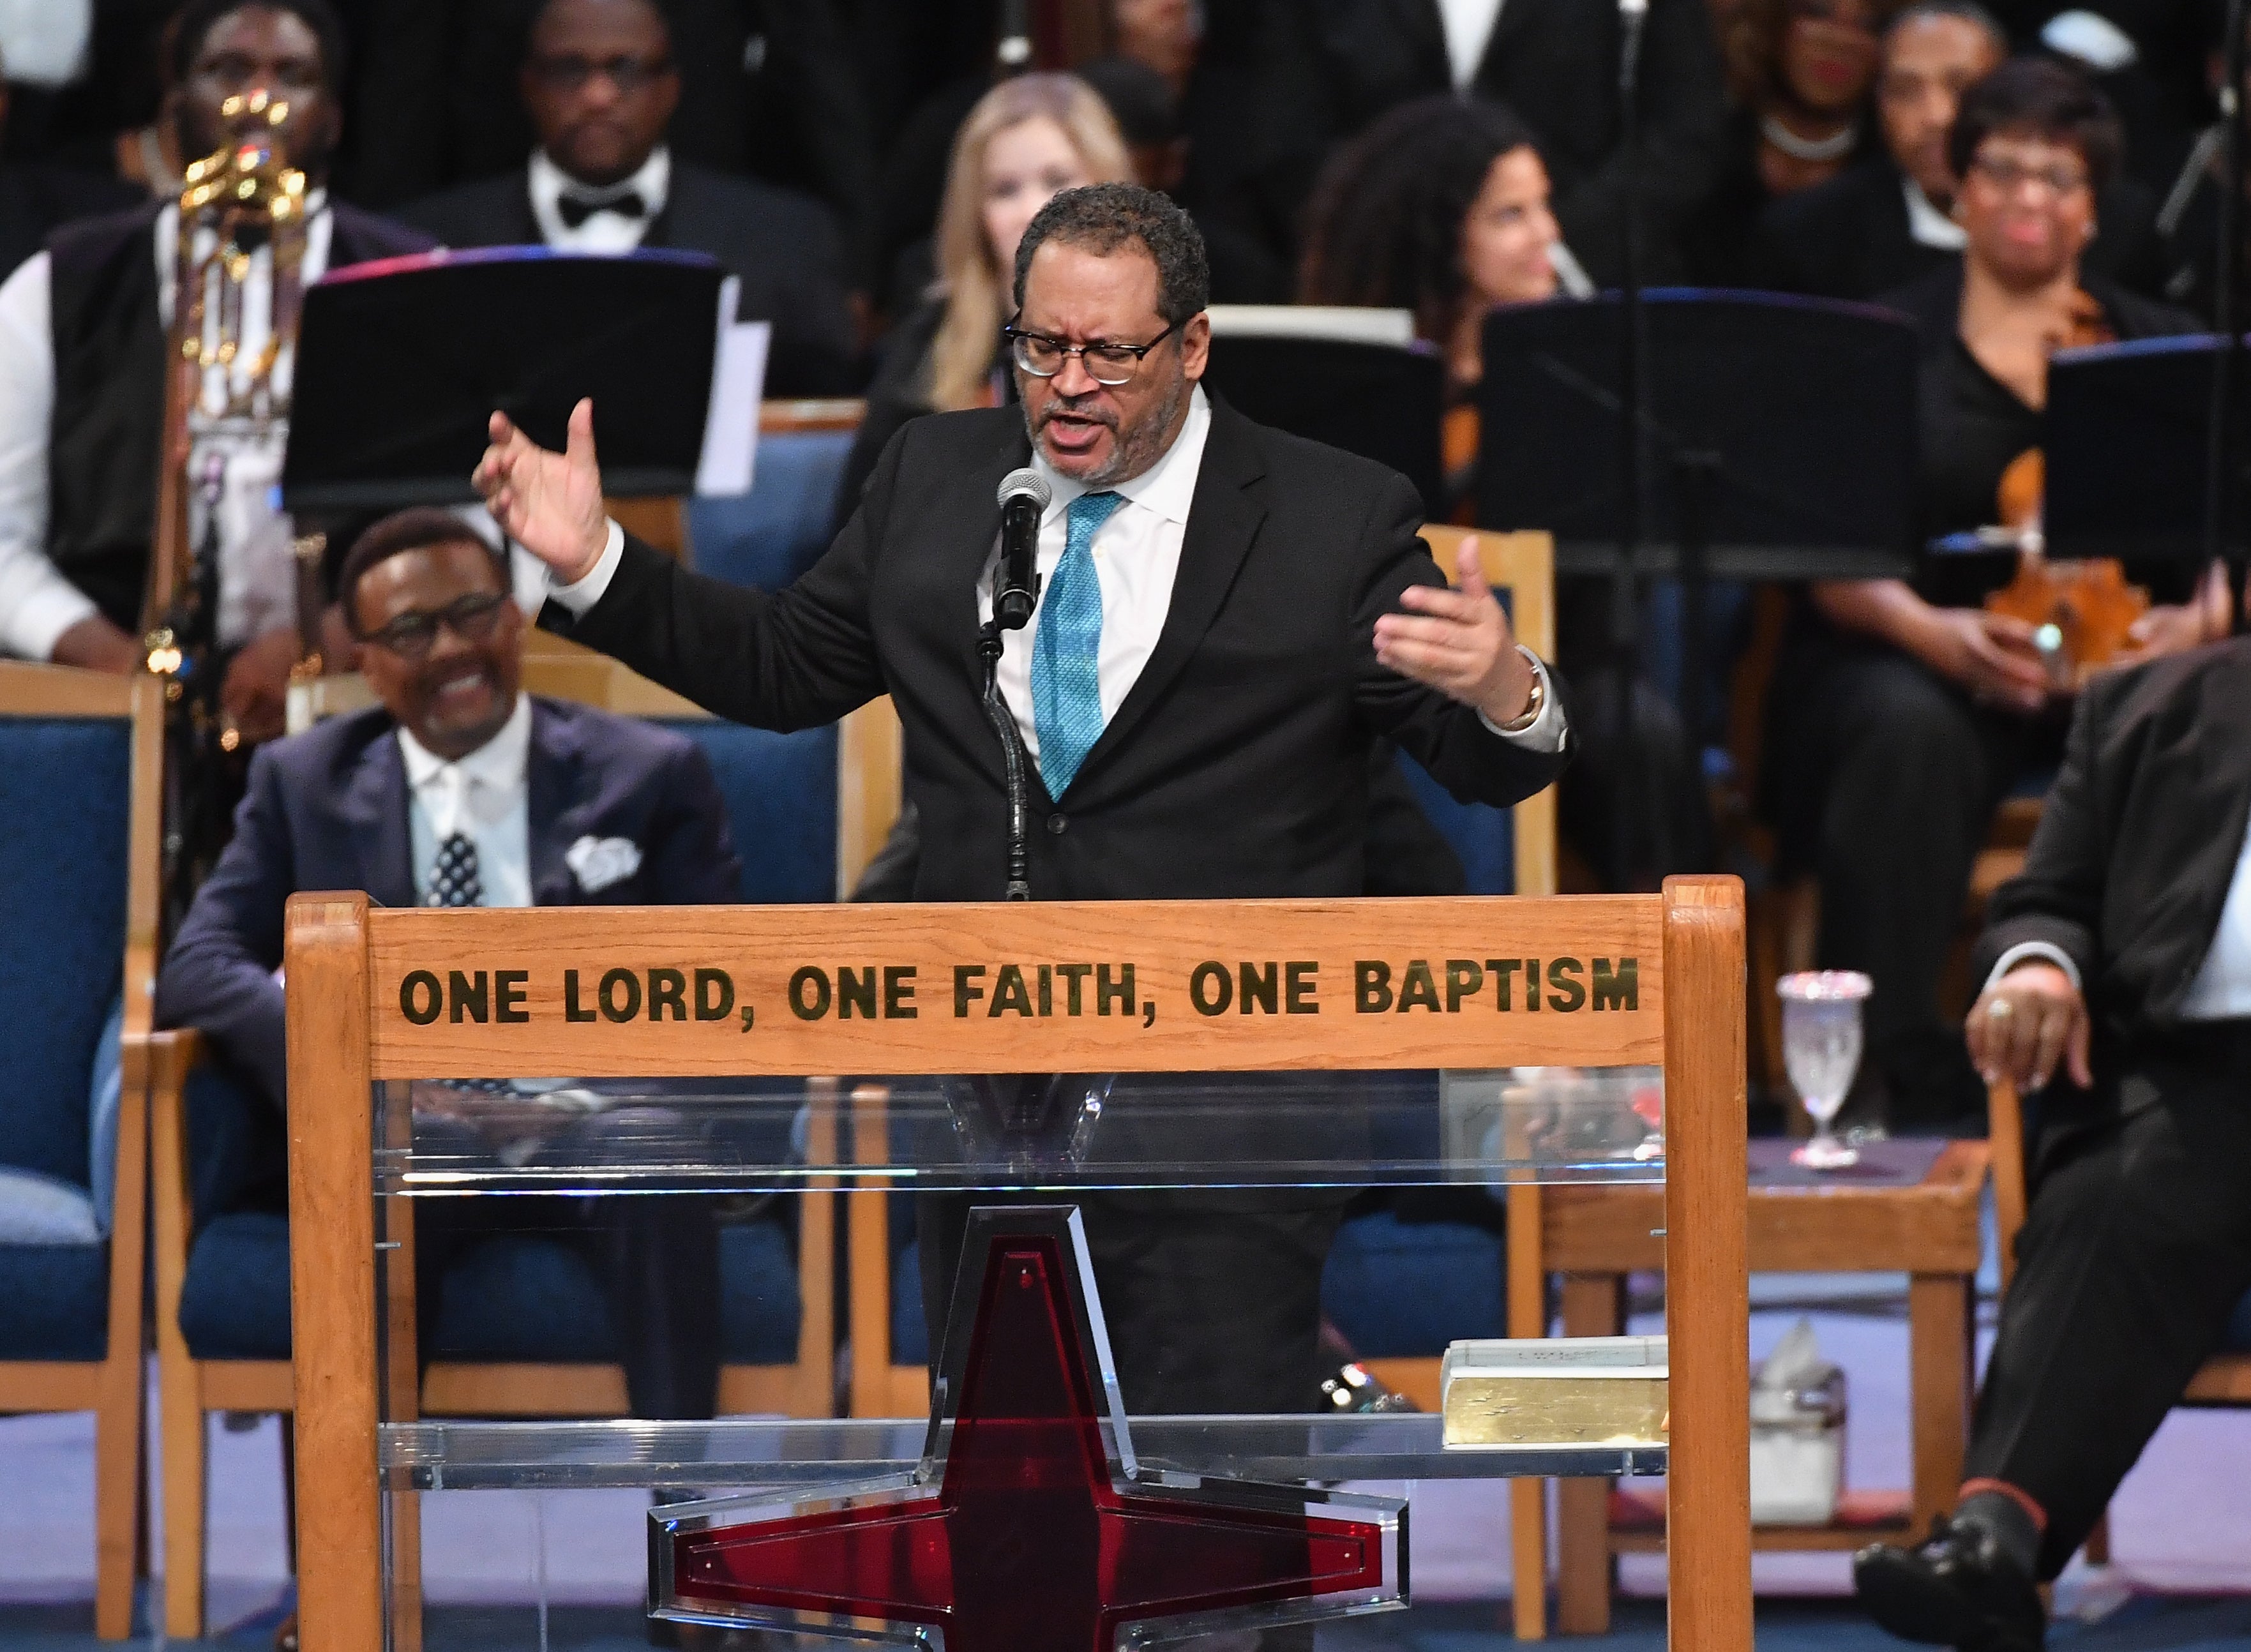 ICYMI: Michael Eric Dyson Rips Trump Over Aretha Franklin Comments - 'She Didn't Work For You, She Worked Beyond You!'